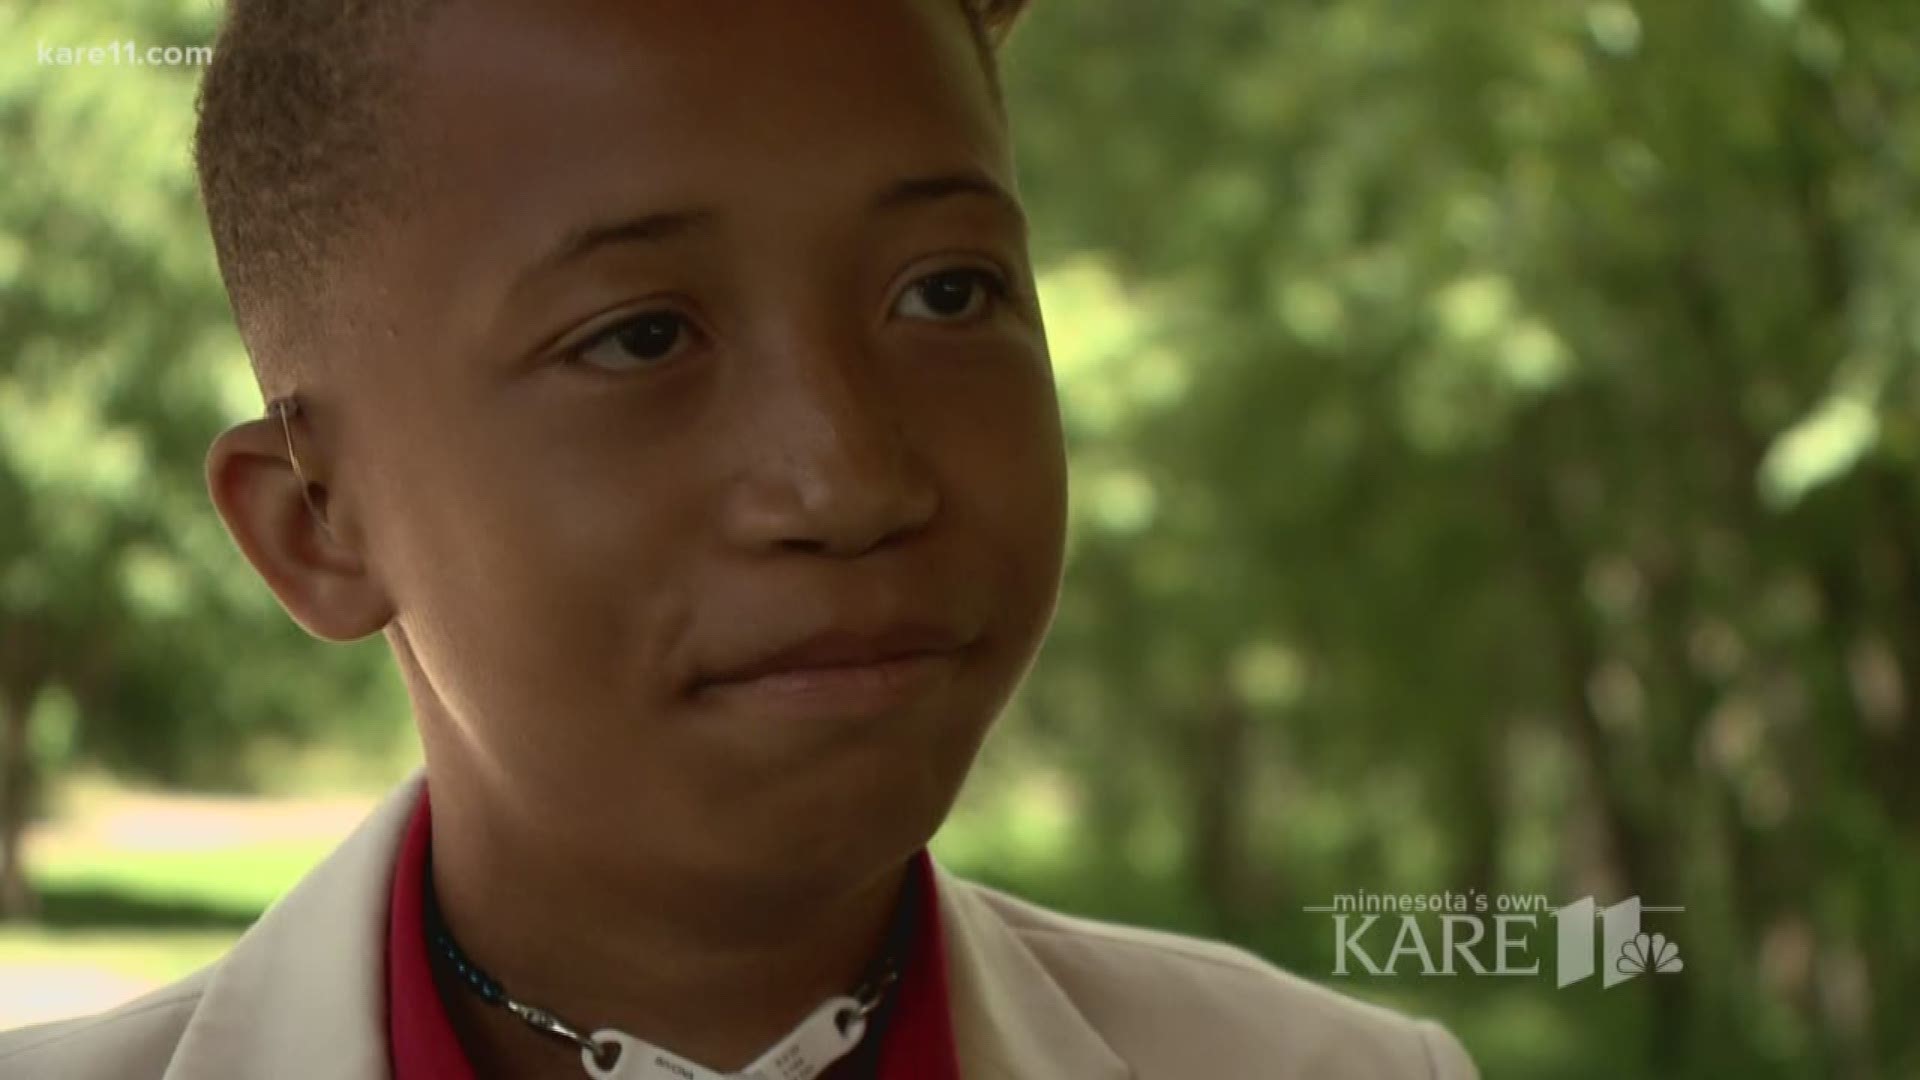 KARE 11 Investigates: A family claims a Twin Cities doctor and Hennepin County Child Protection filed allegations of medical abuse without a proper investigation. http://kare11.tv/2mNeS9y